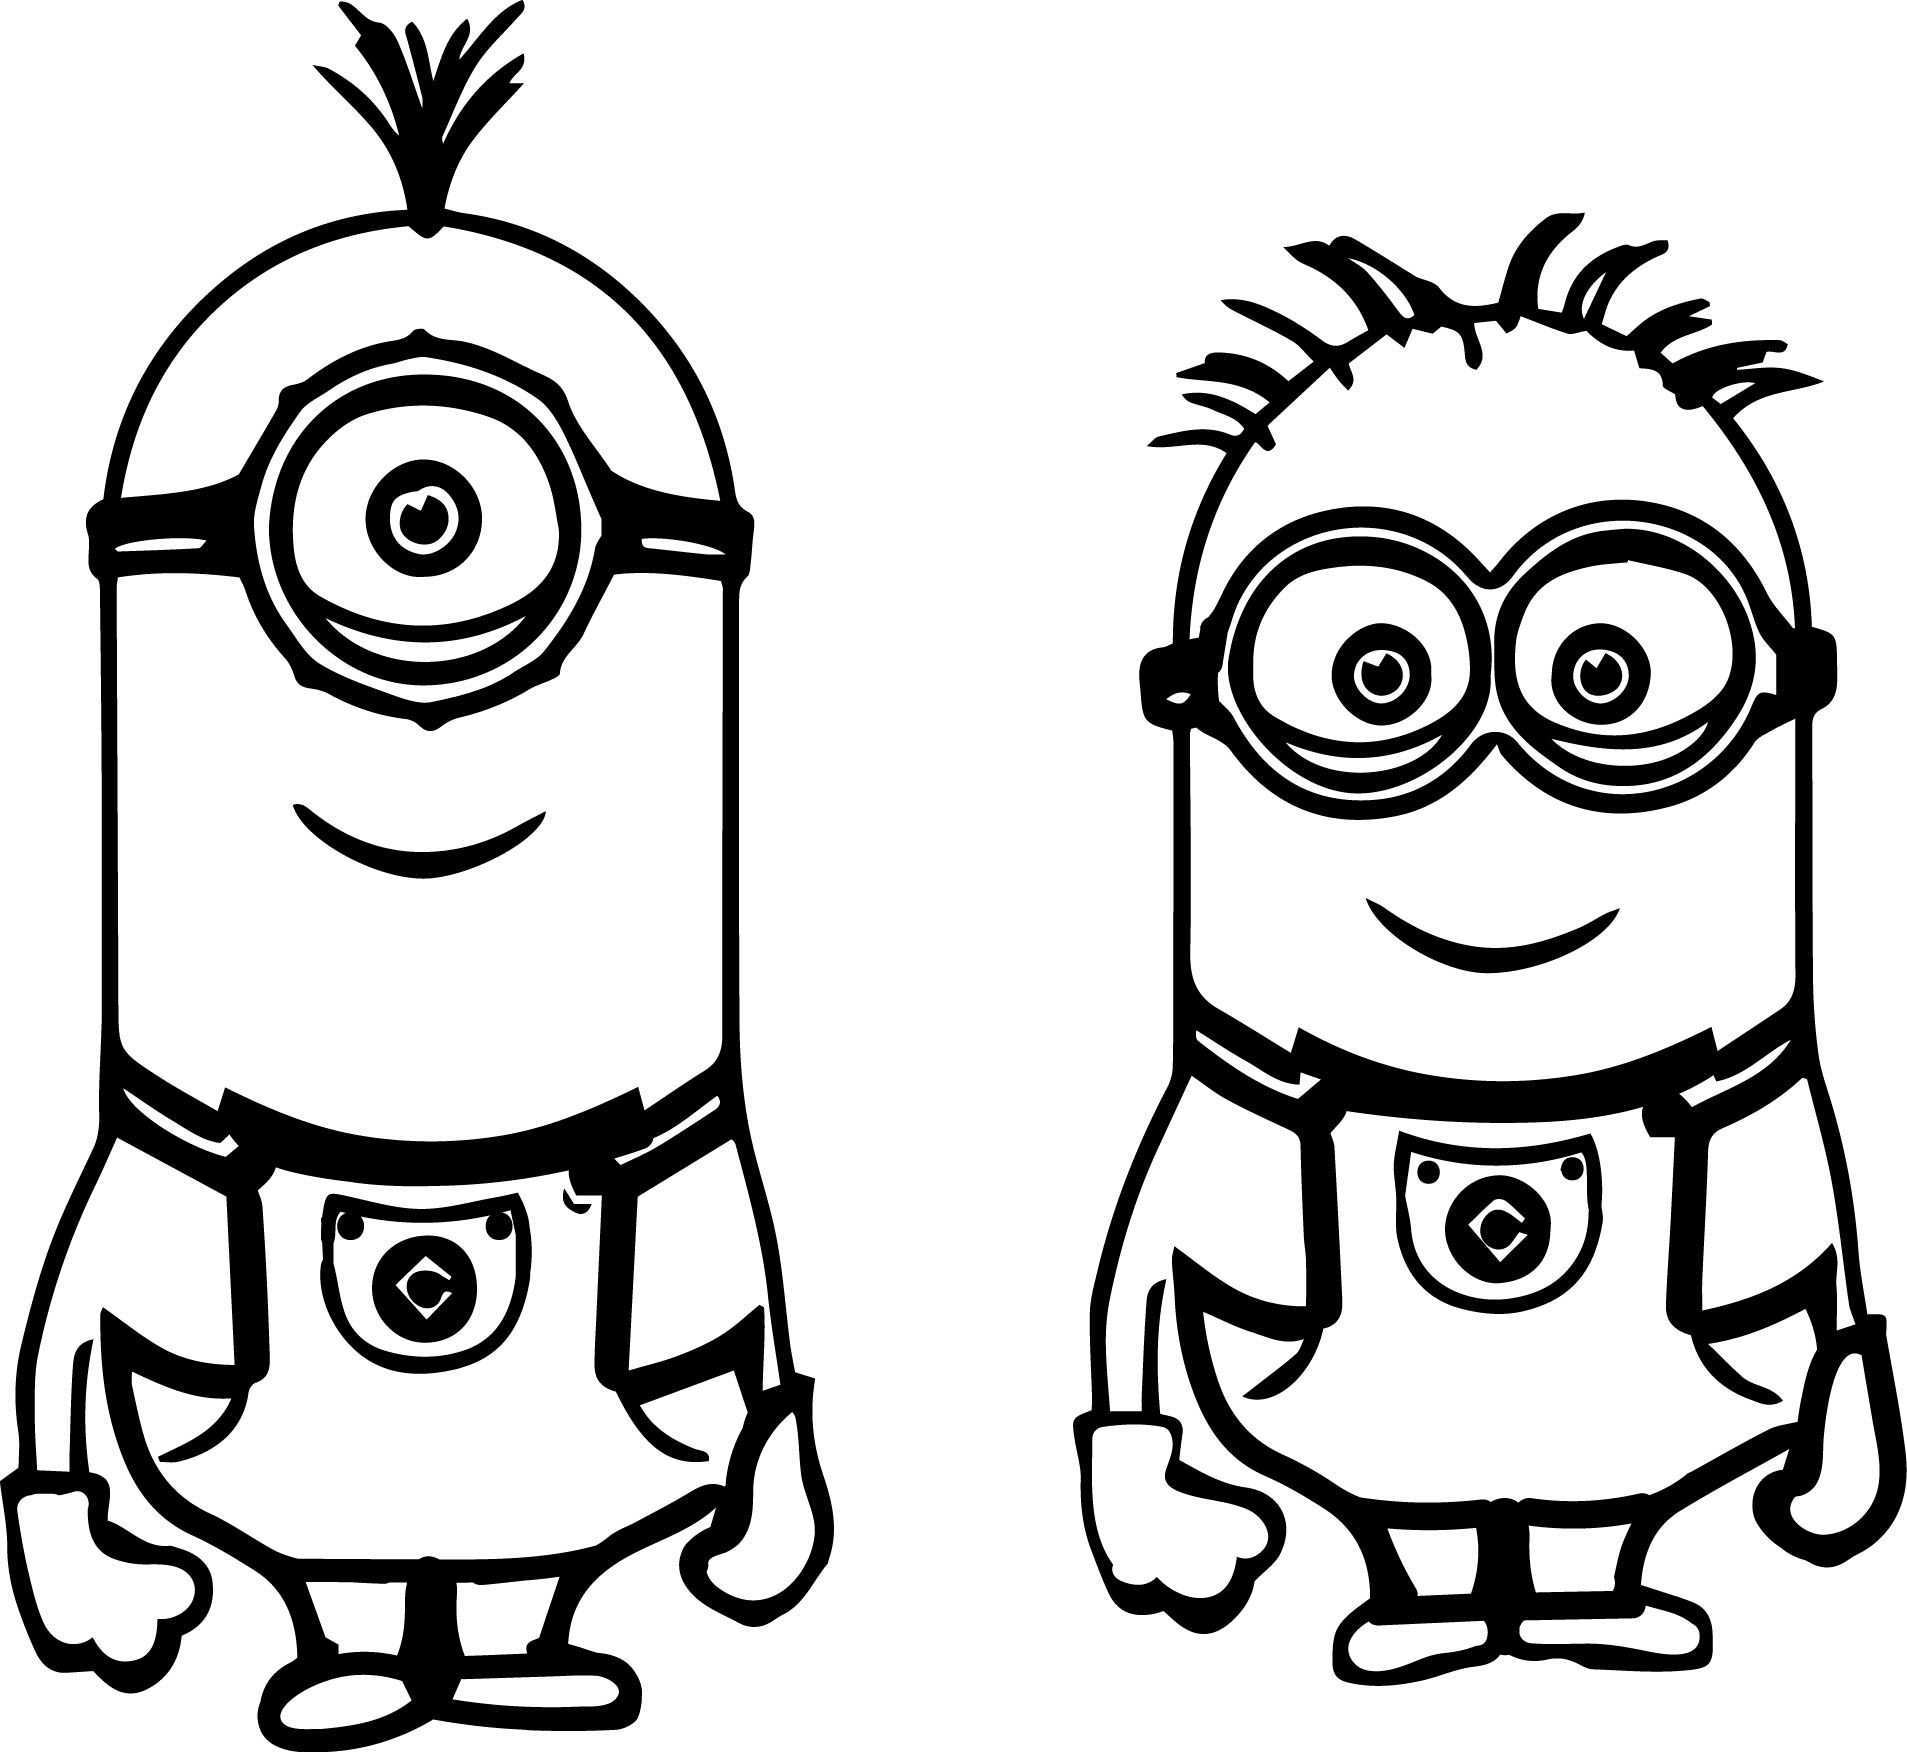 Minion Coloring Pages Printable For Kids Minions Coloring Pages Minion Coloring Pages